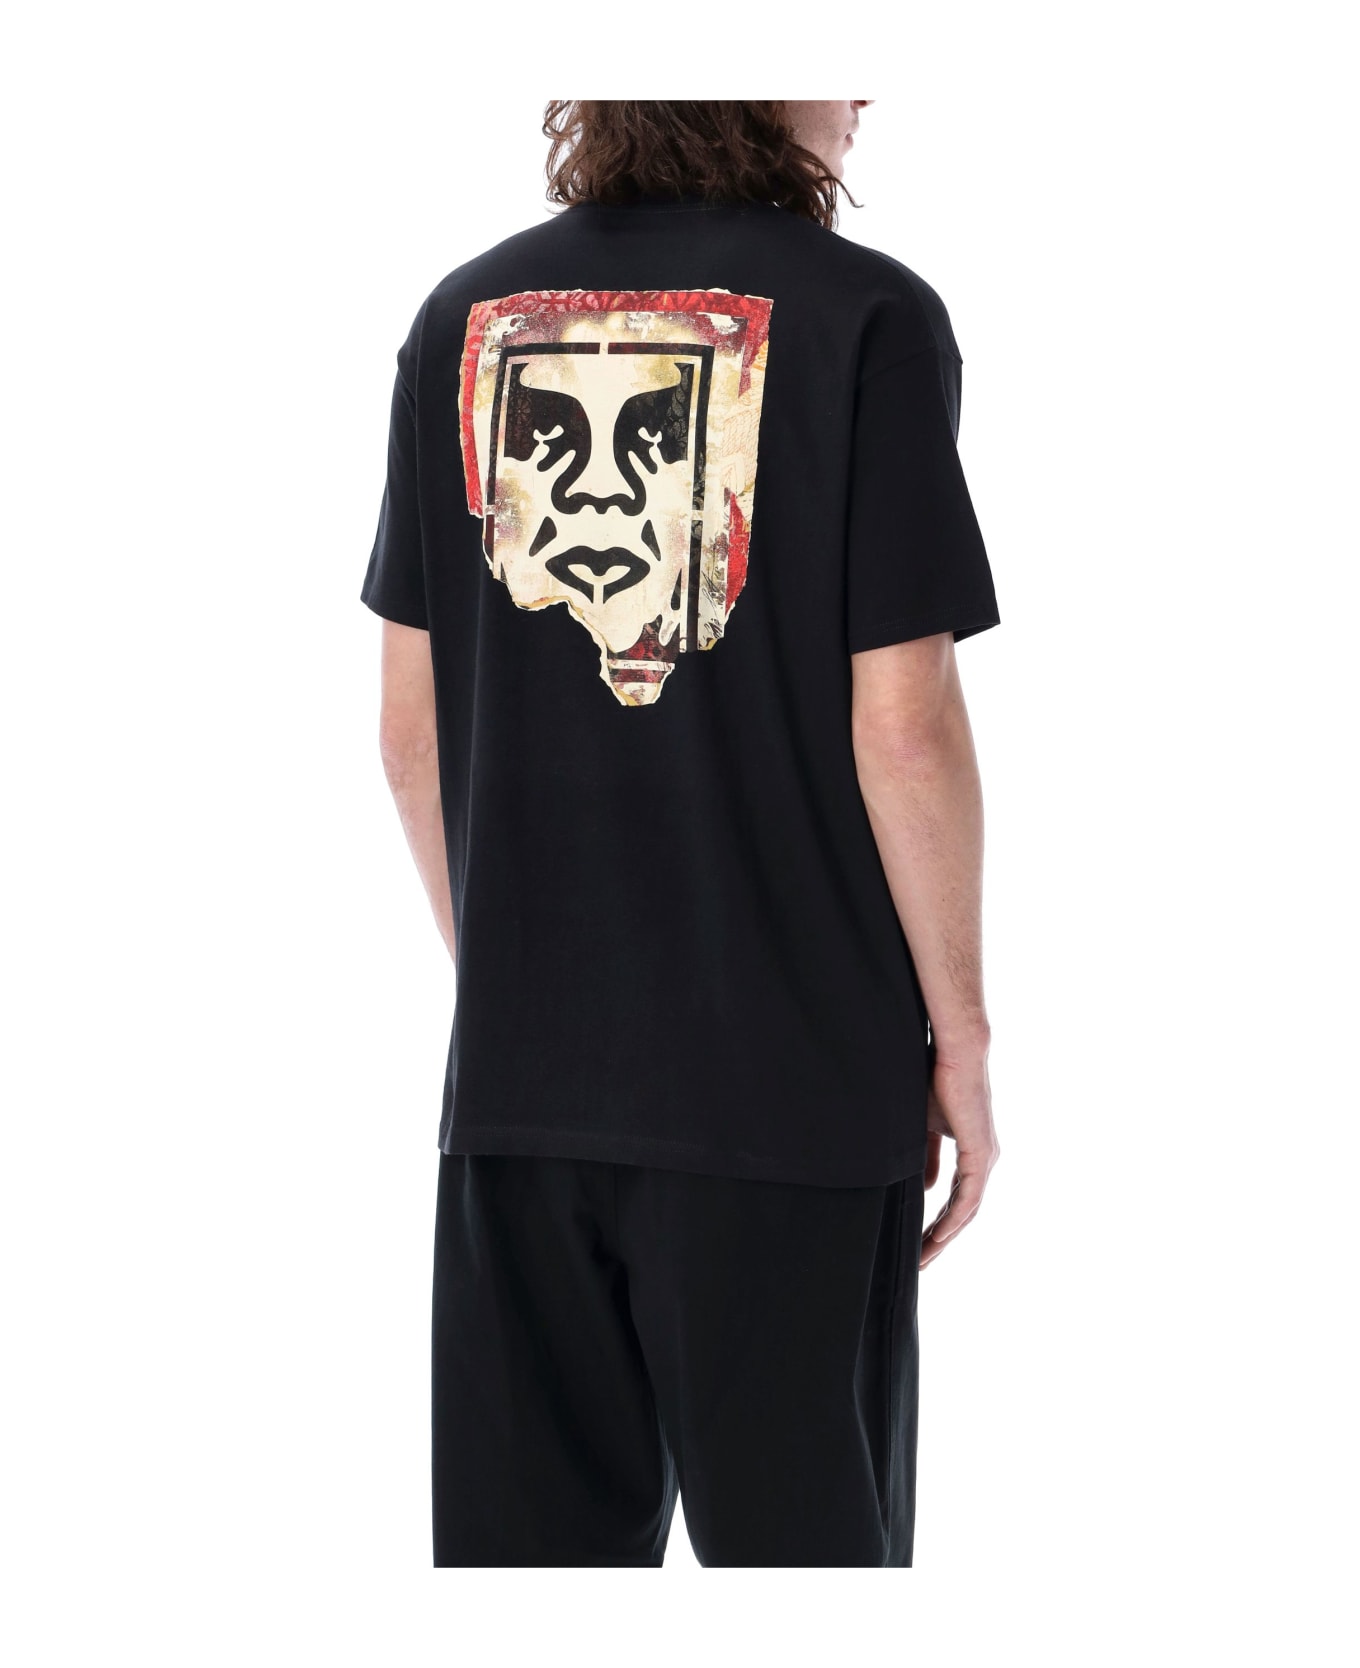 Obey Ripped Icon T-shirt - BLACK